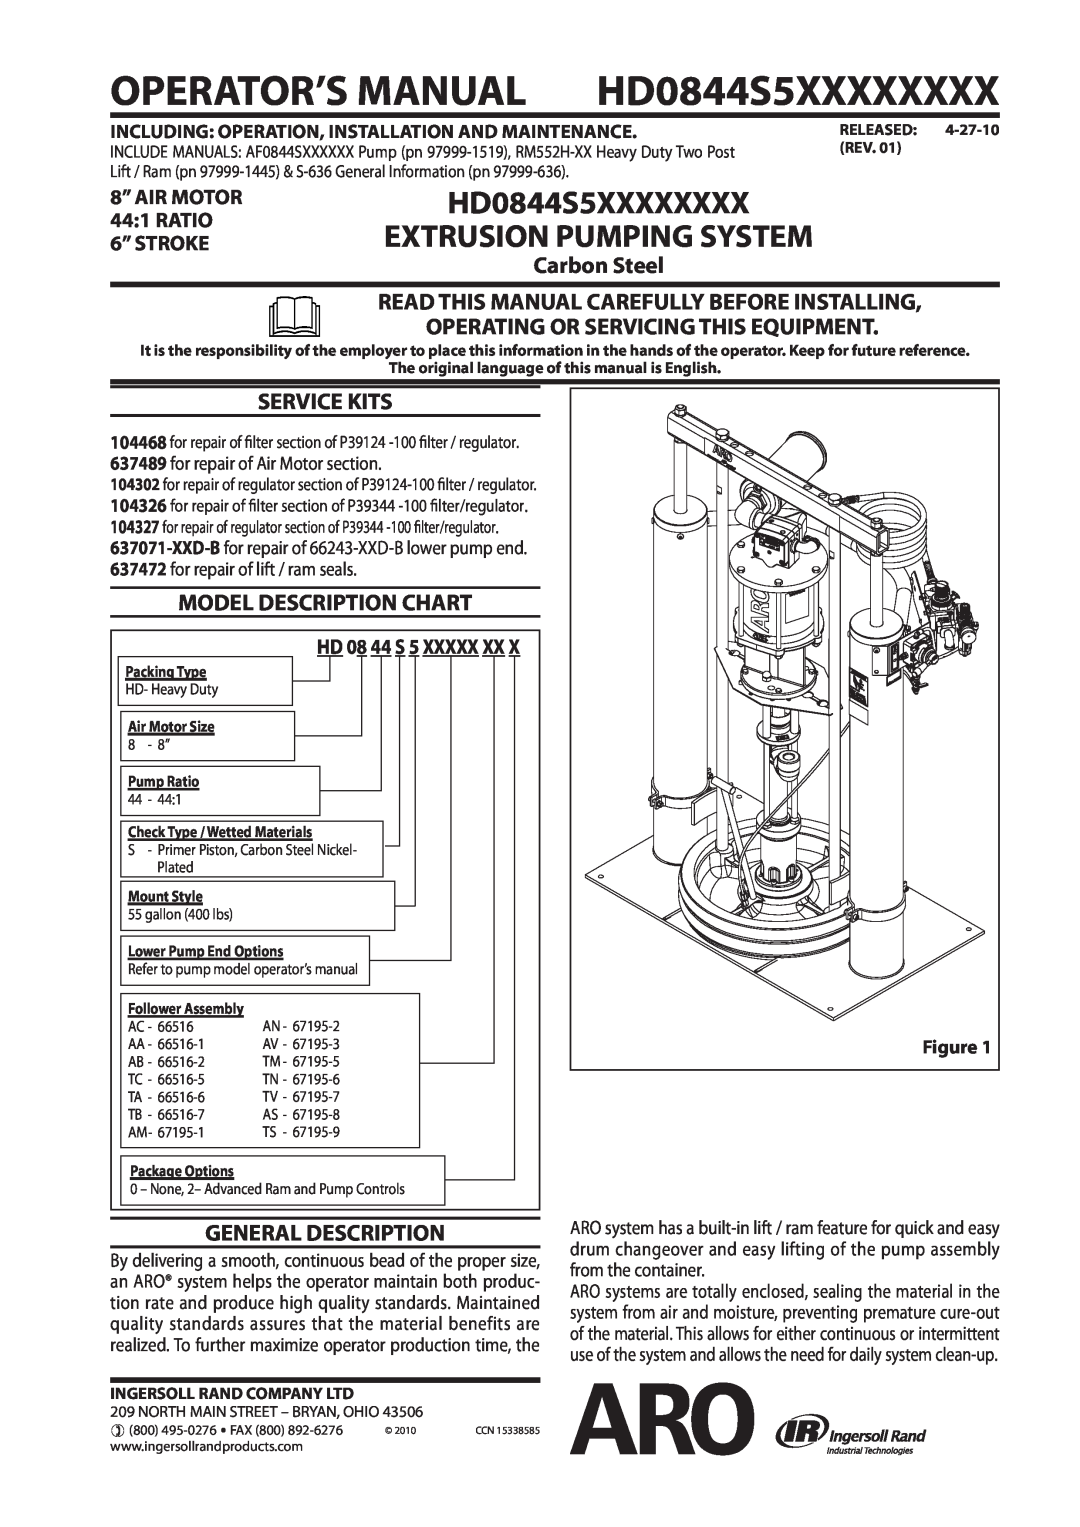 Ingersoll-Rand HD0844S5XXXXXXXX manual Read This Manual Carefully Before Installing, Operating Or Servicing This Equipment 